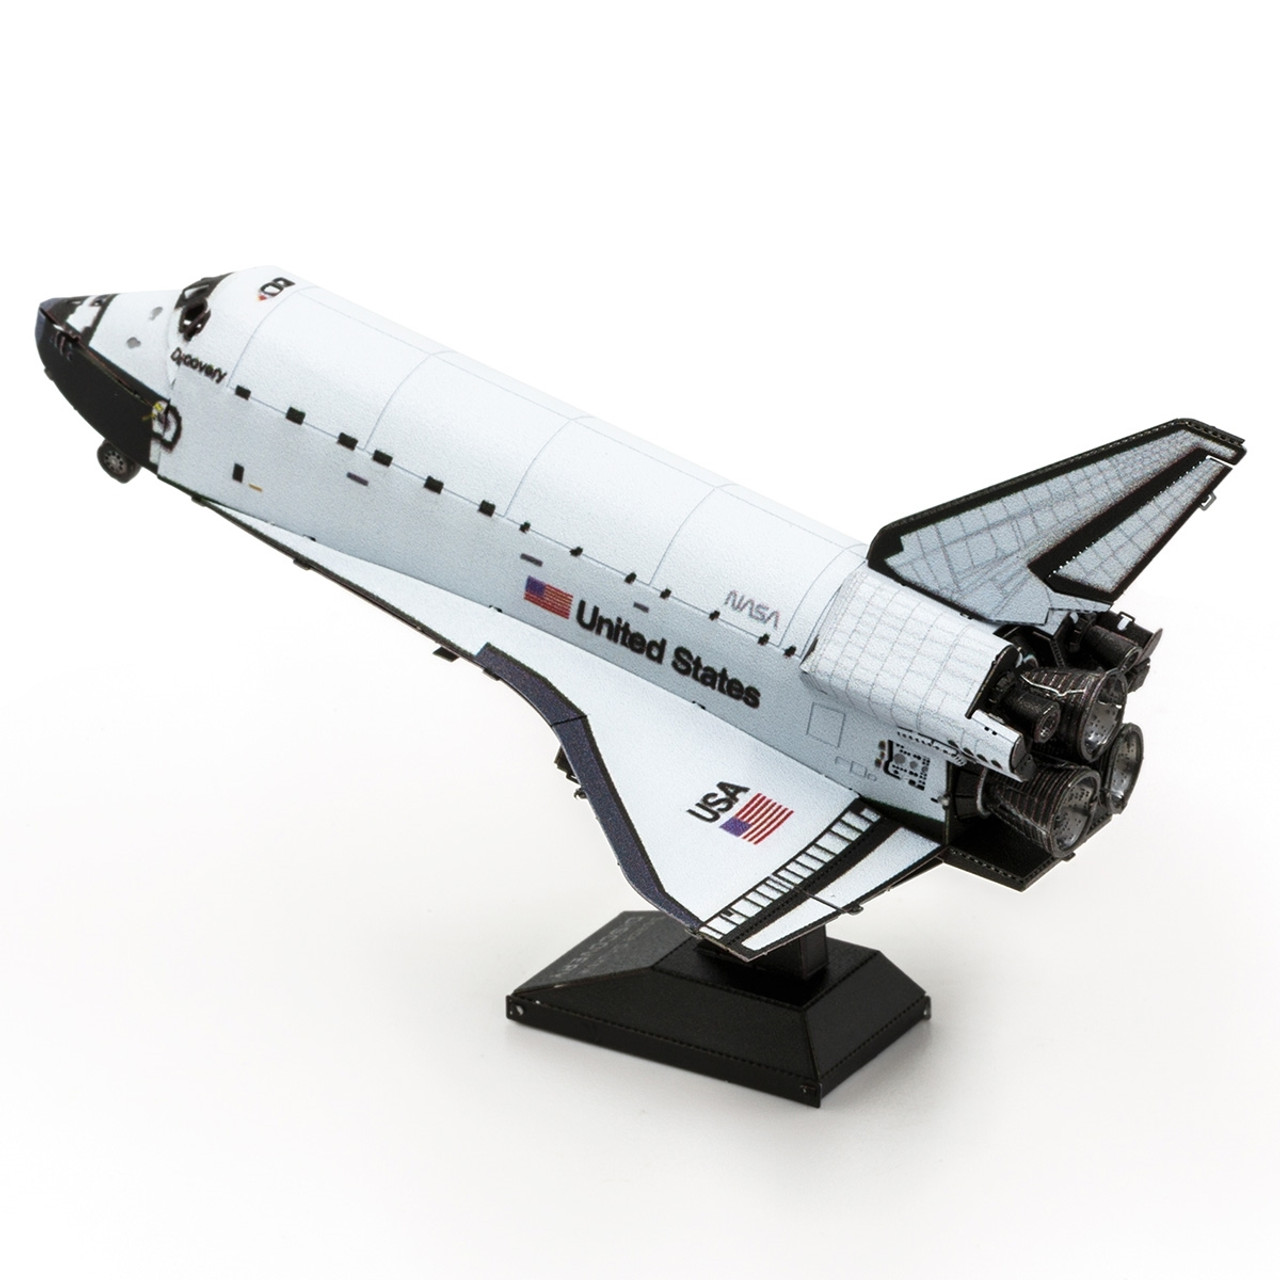 space shuttle discovery model